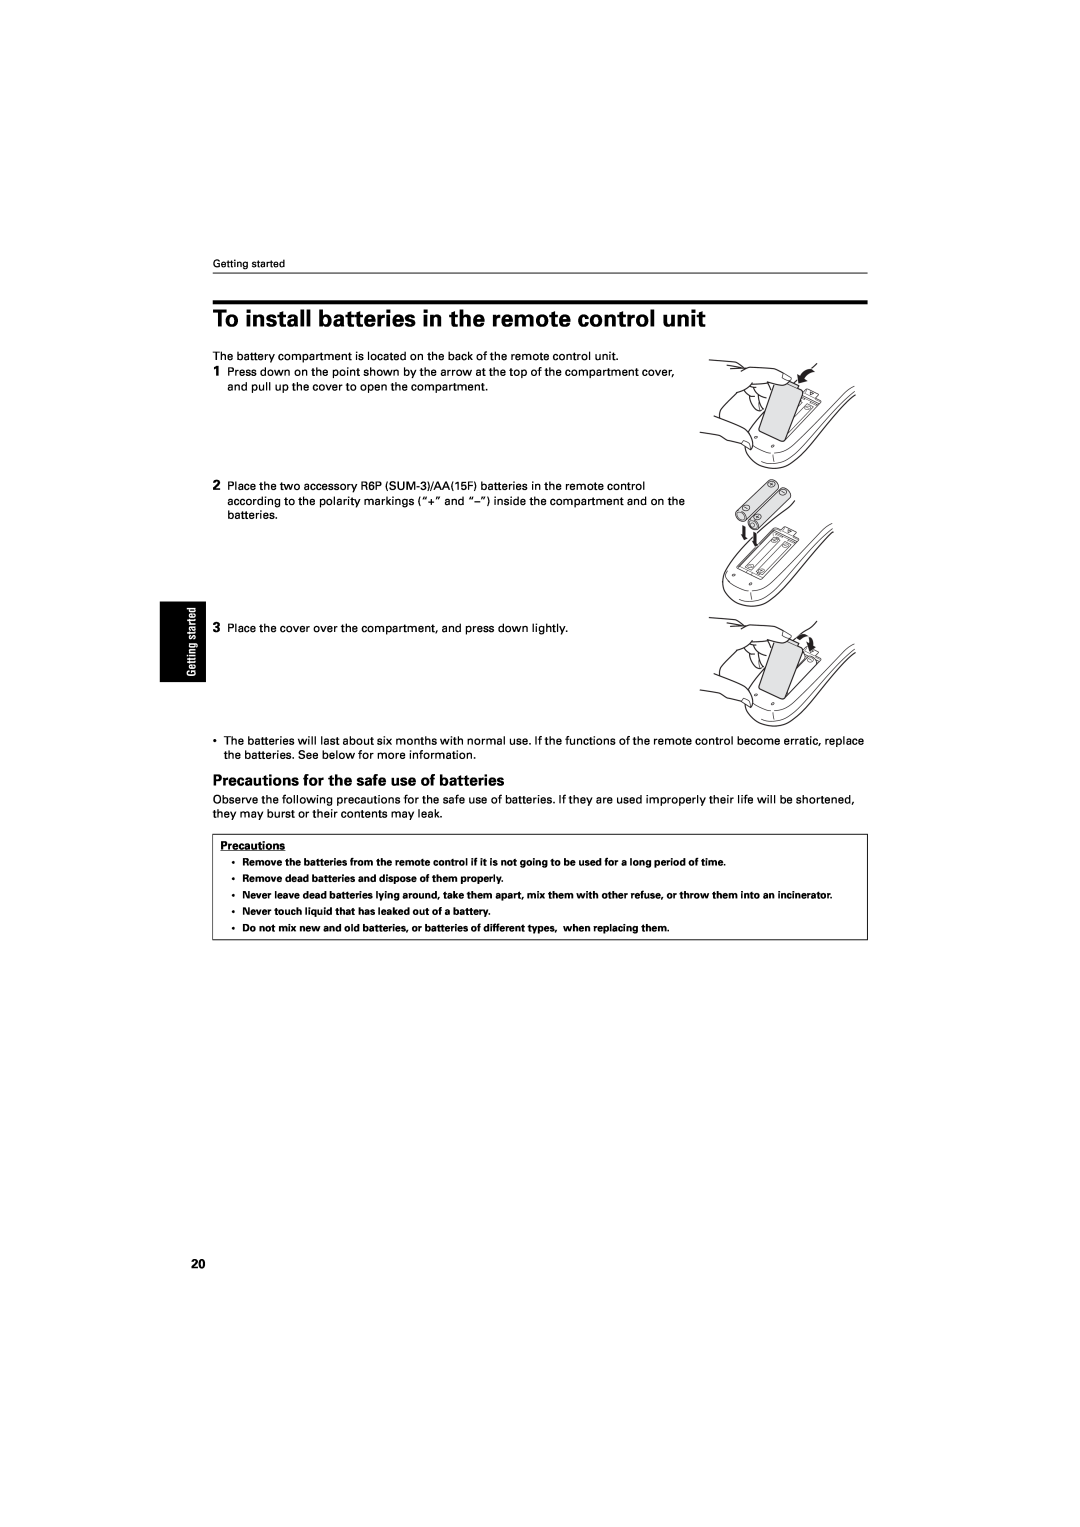 JVC GNT0013-014A manual To install batteries in the remote control unit, Precautions for the safe use of batteries 